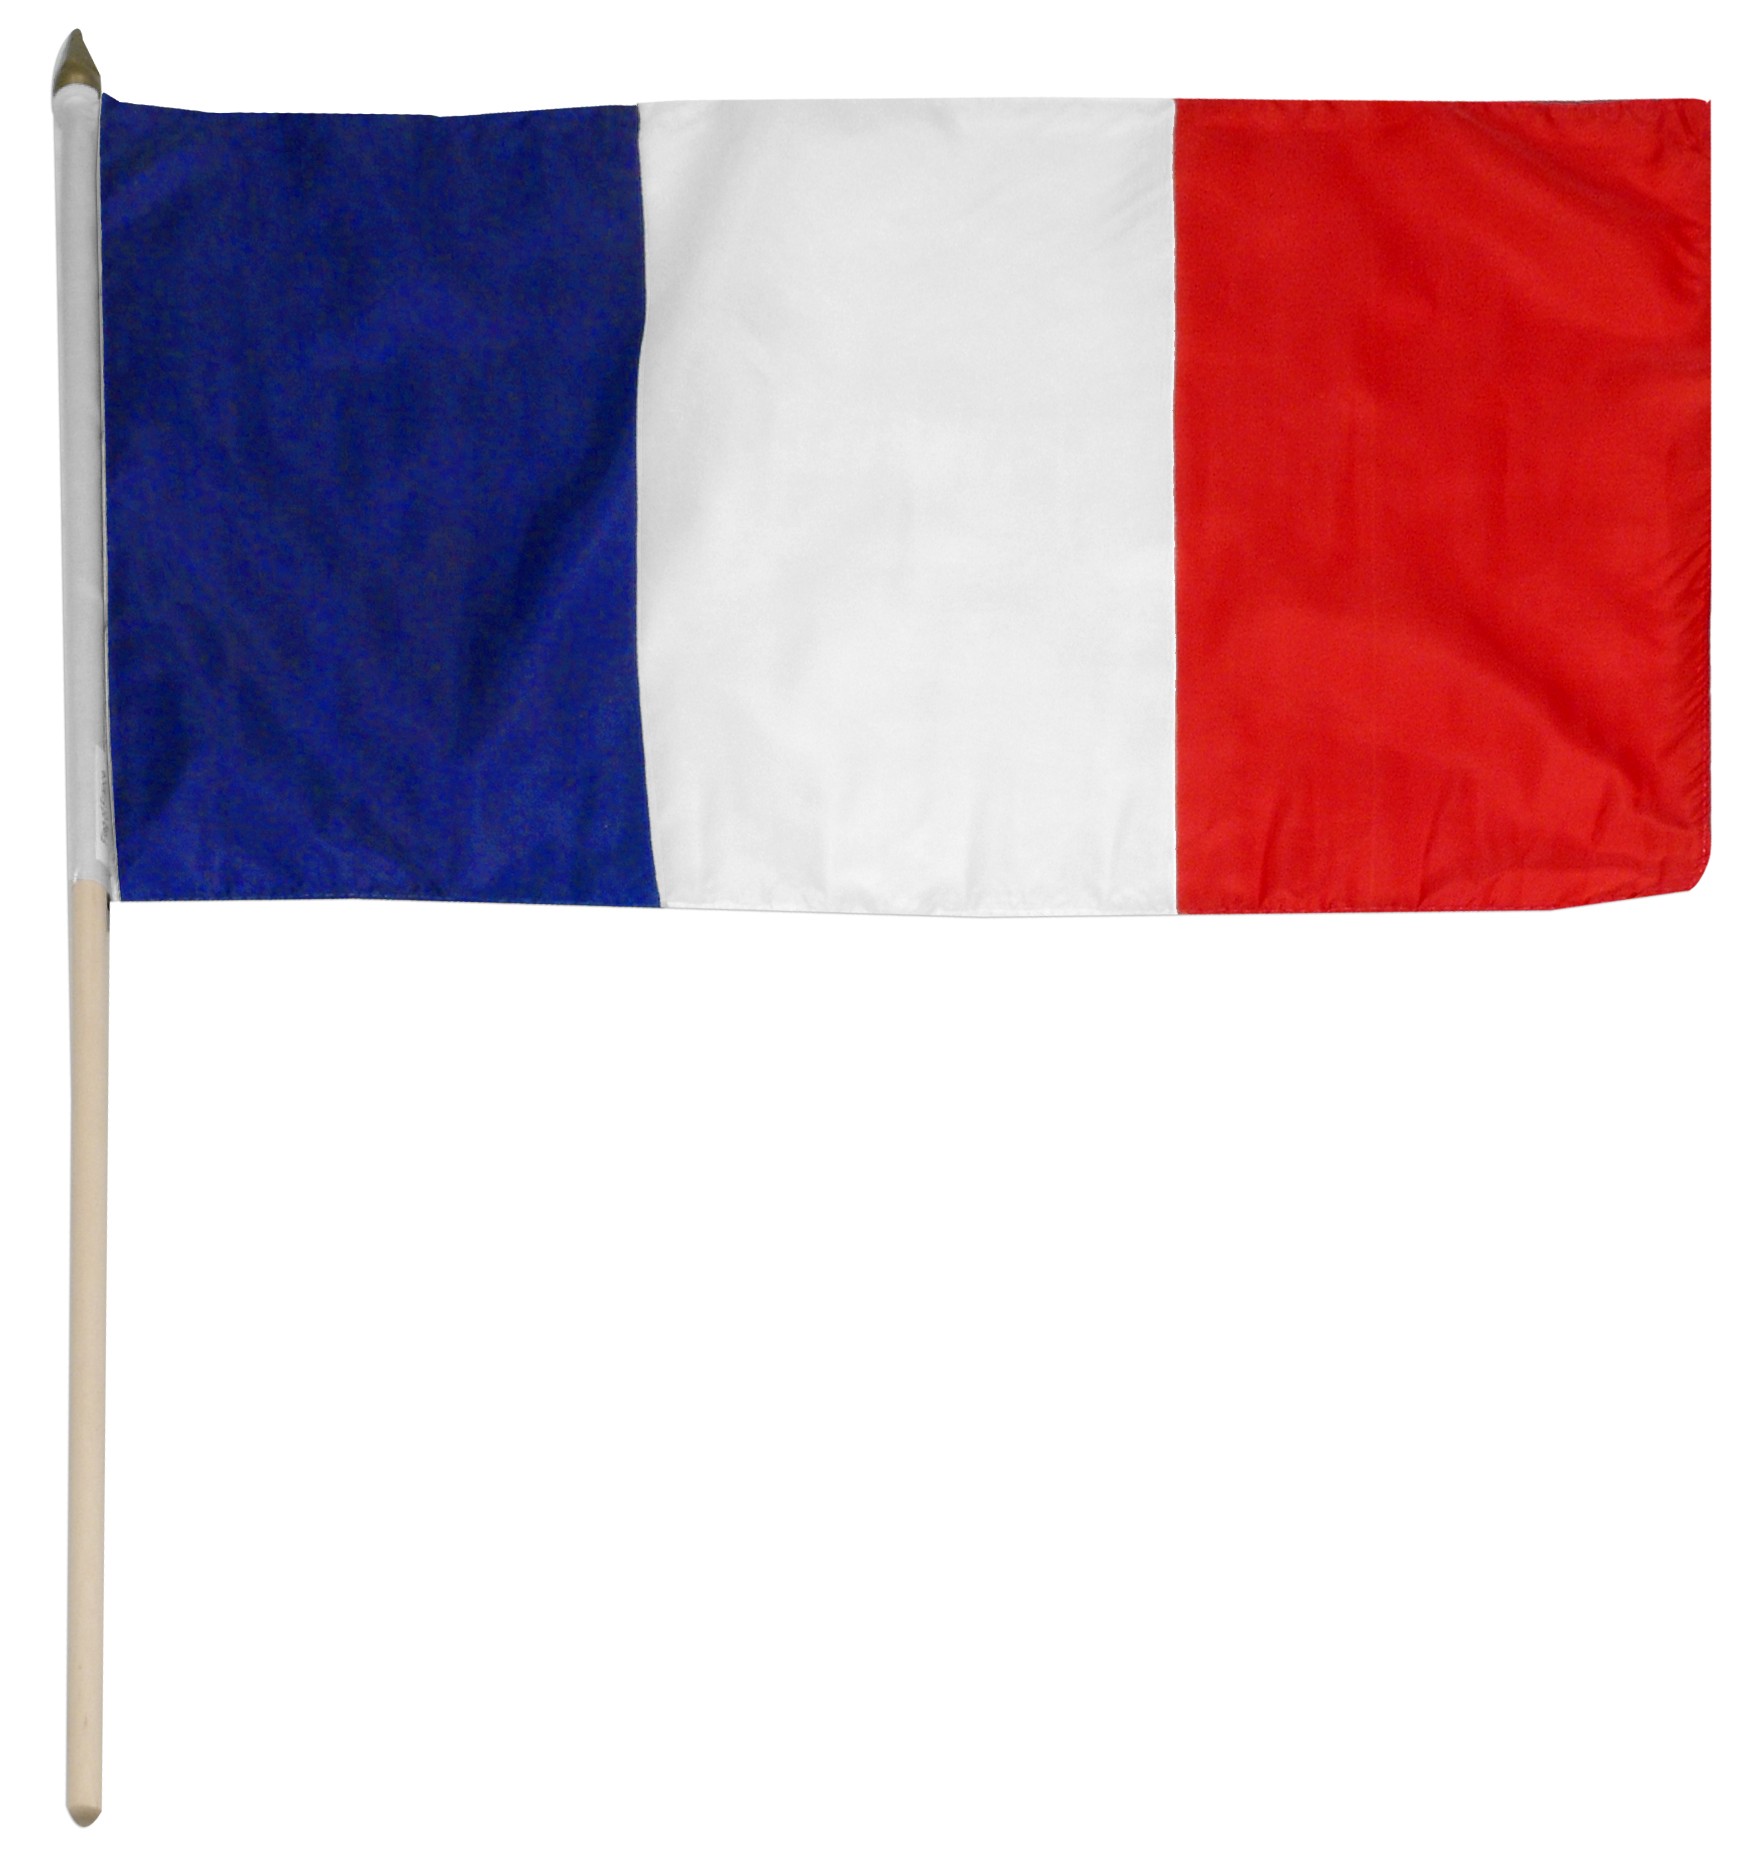 France Flag Share Wallpaper Gallery To